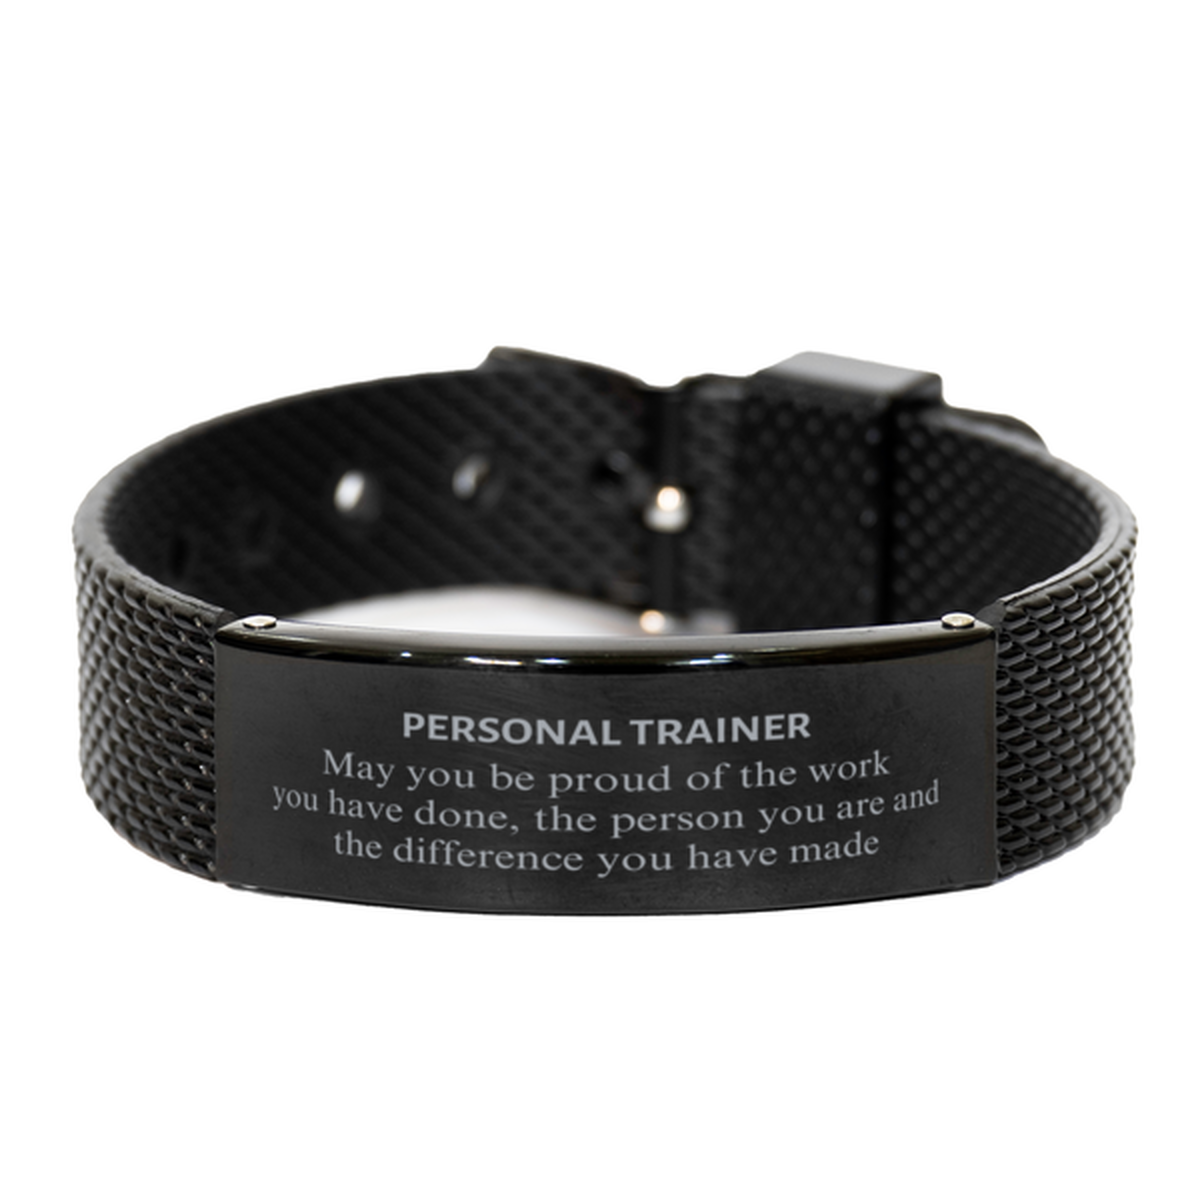 Personal Trainer May you be proud of the work you have done, Retirement Personal Trainer Black Shark Mesh Bracelet for Colleague Appreciation Gifts Amazing for Personal Trainer